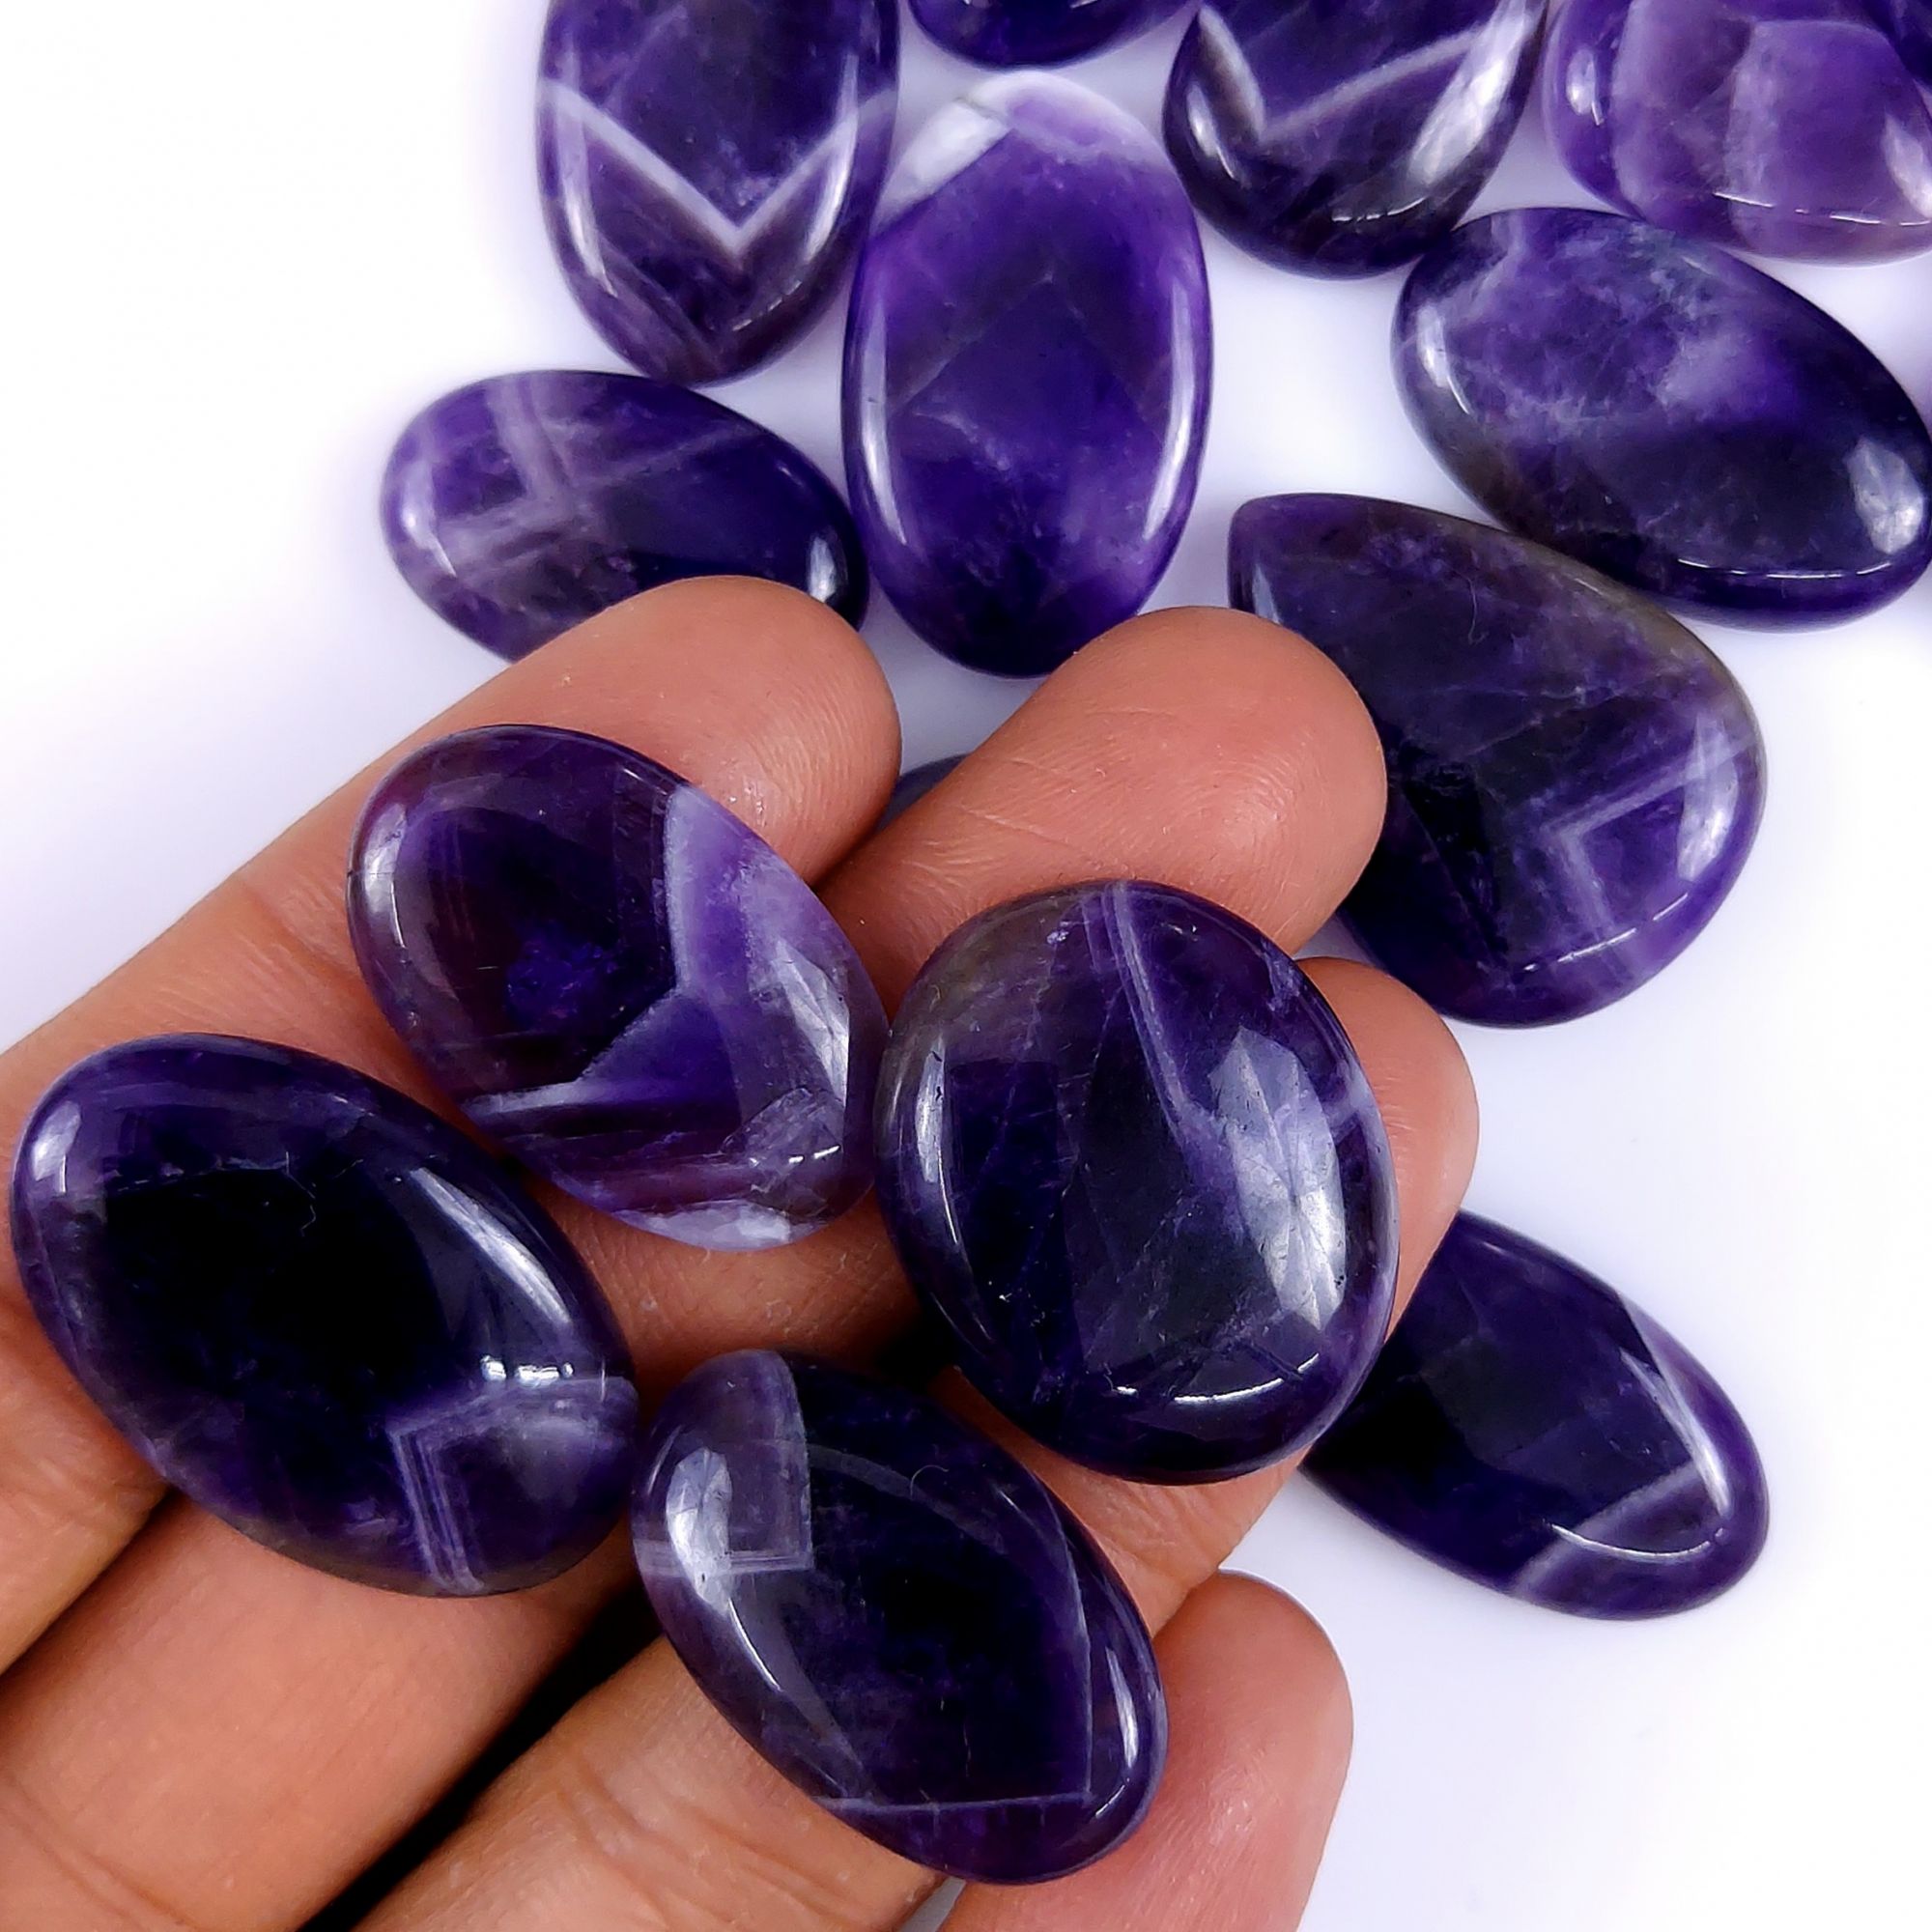 17Pcs 440Cts Natural Amethyst Cabochon lot Gemstone Purple Crystal Mix Shape Loose Gemstone beads for jewelry Making 35x18 14x12mm #7503